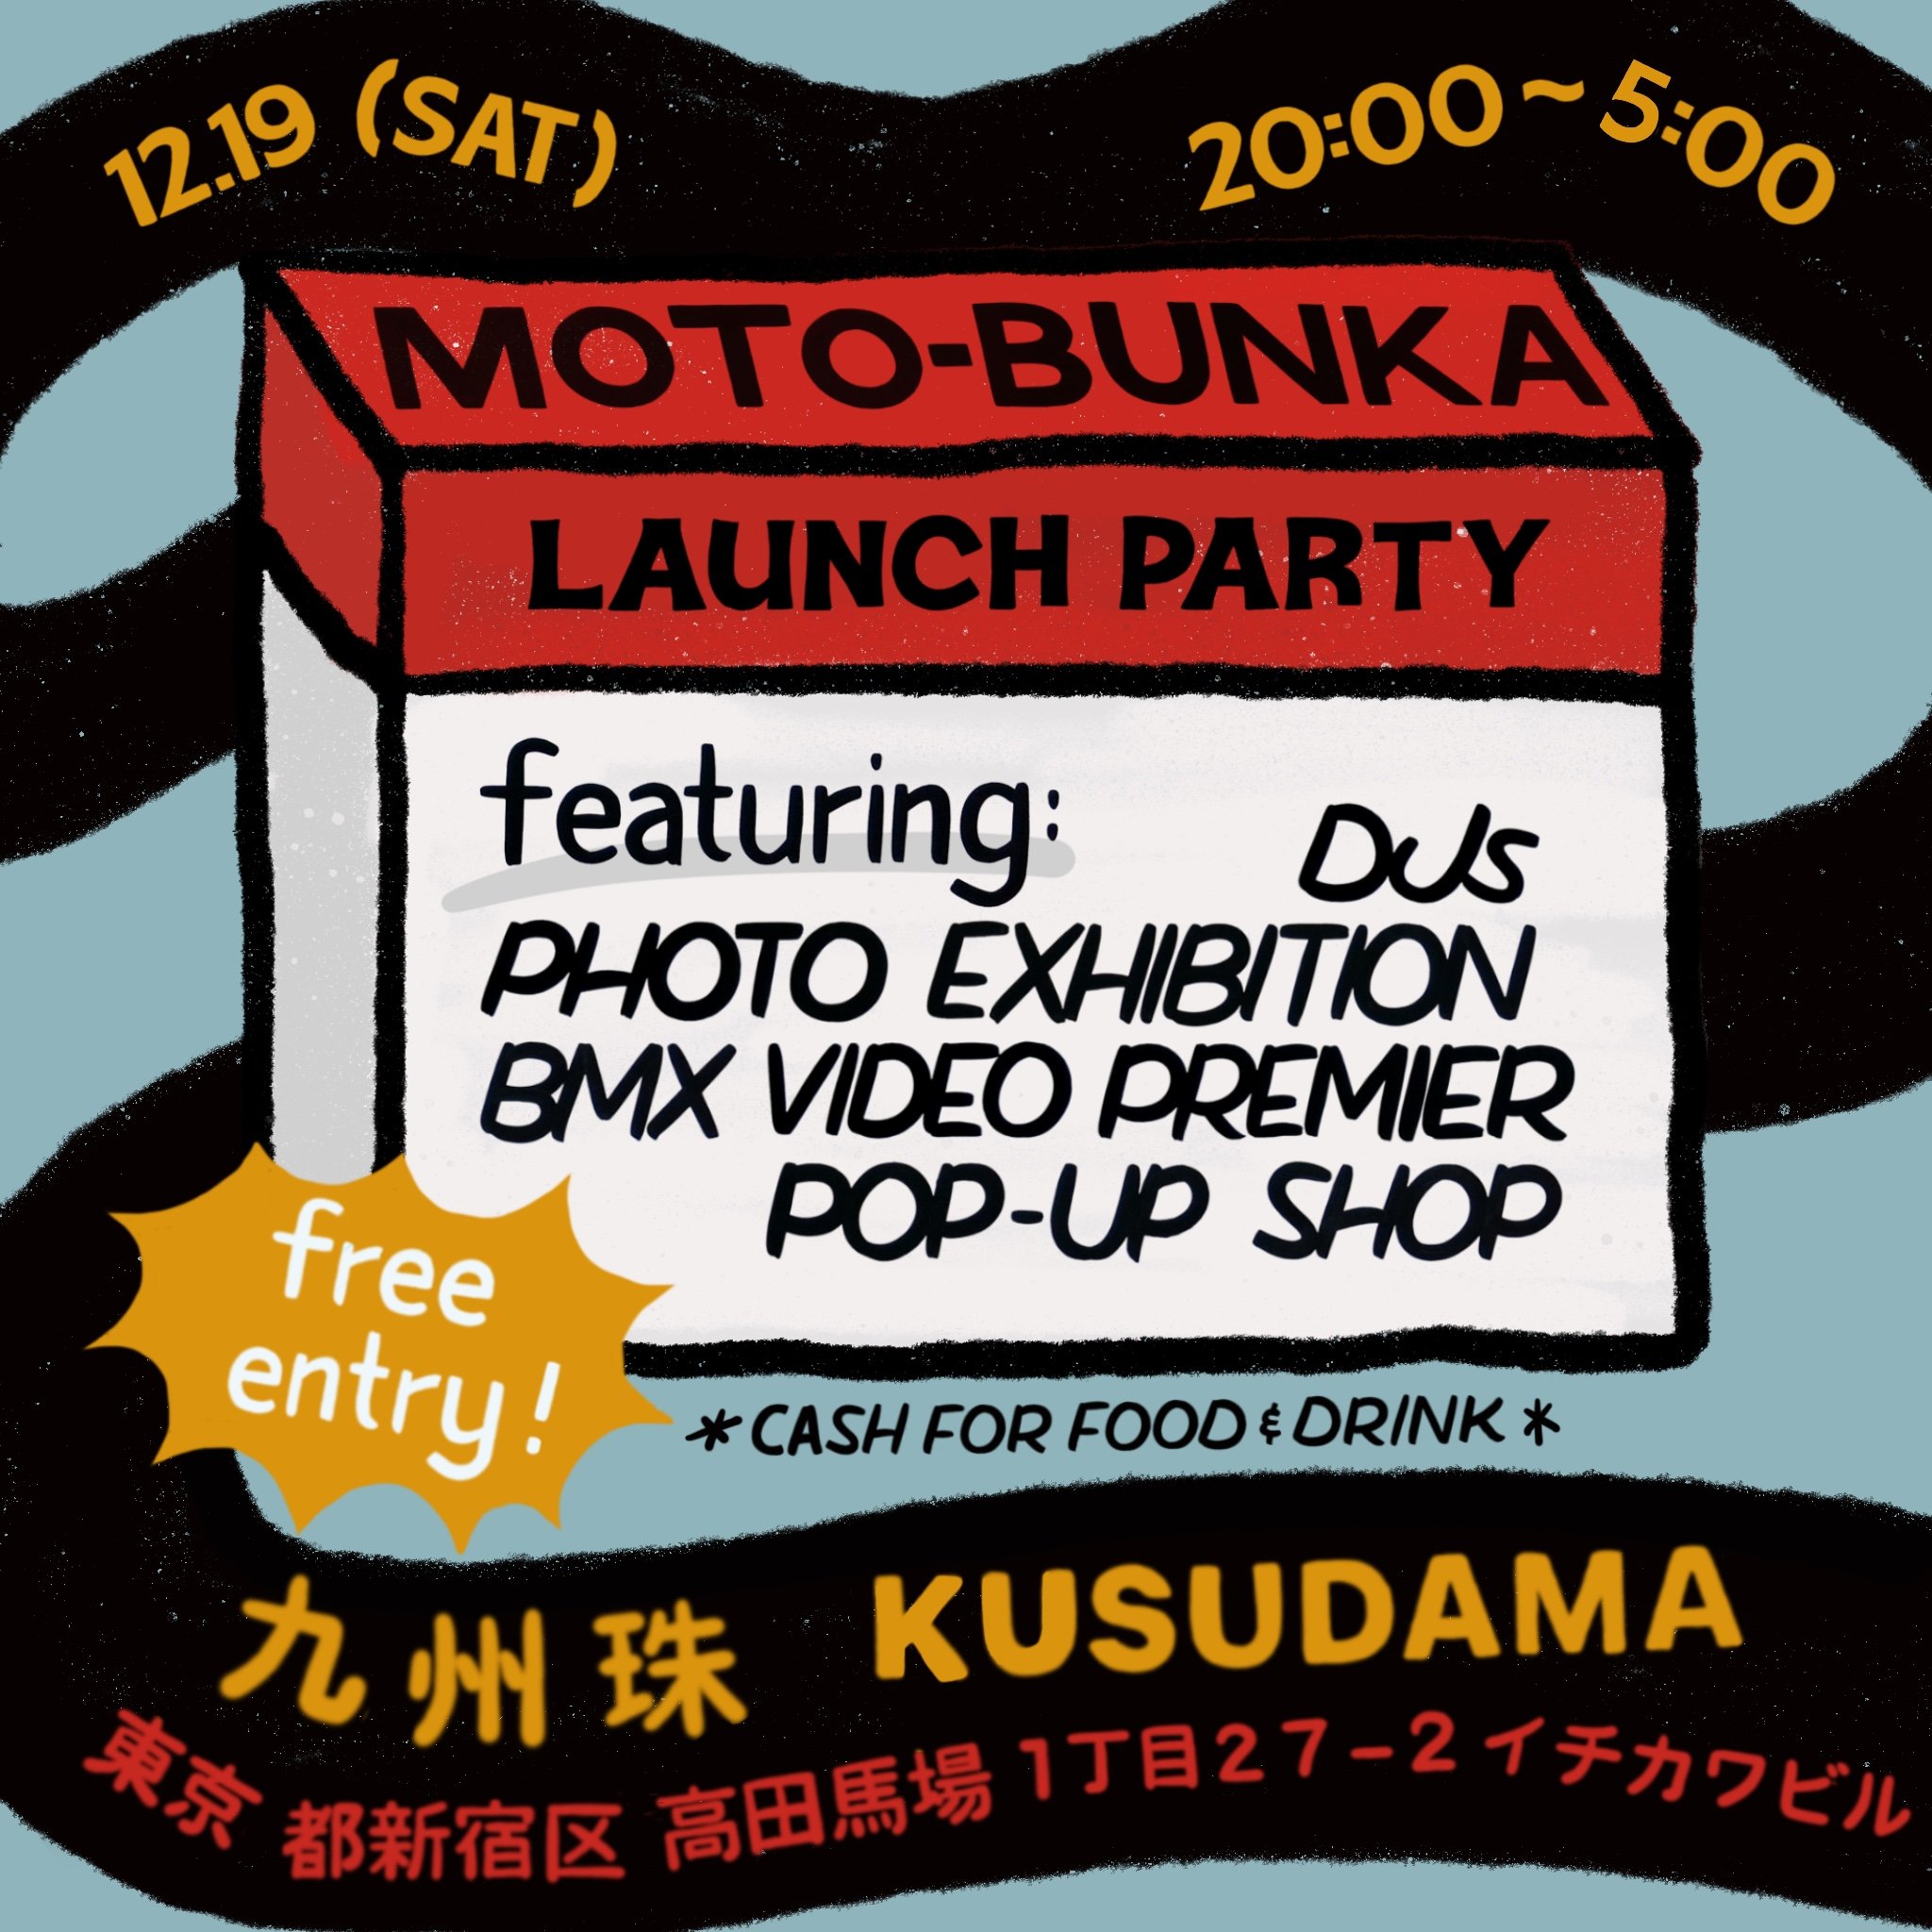 You are currently viewing 12/19 (SAT) MOTO-BUNKA PARTY